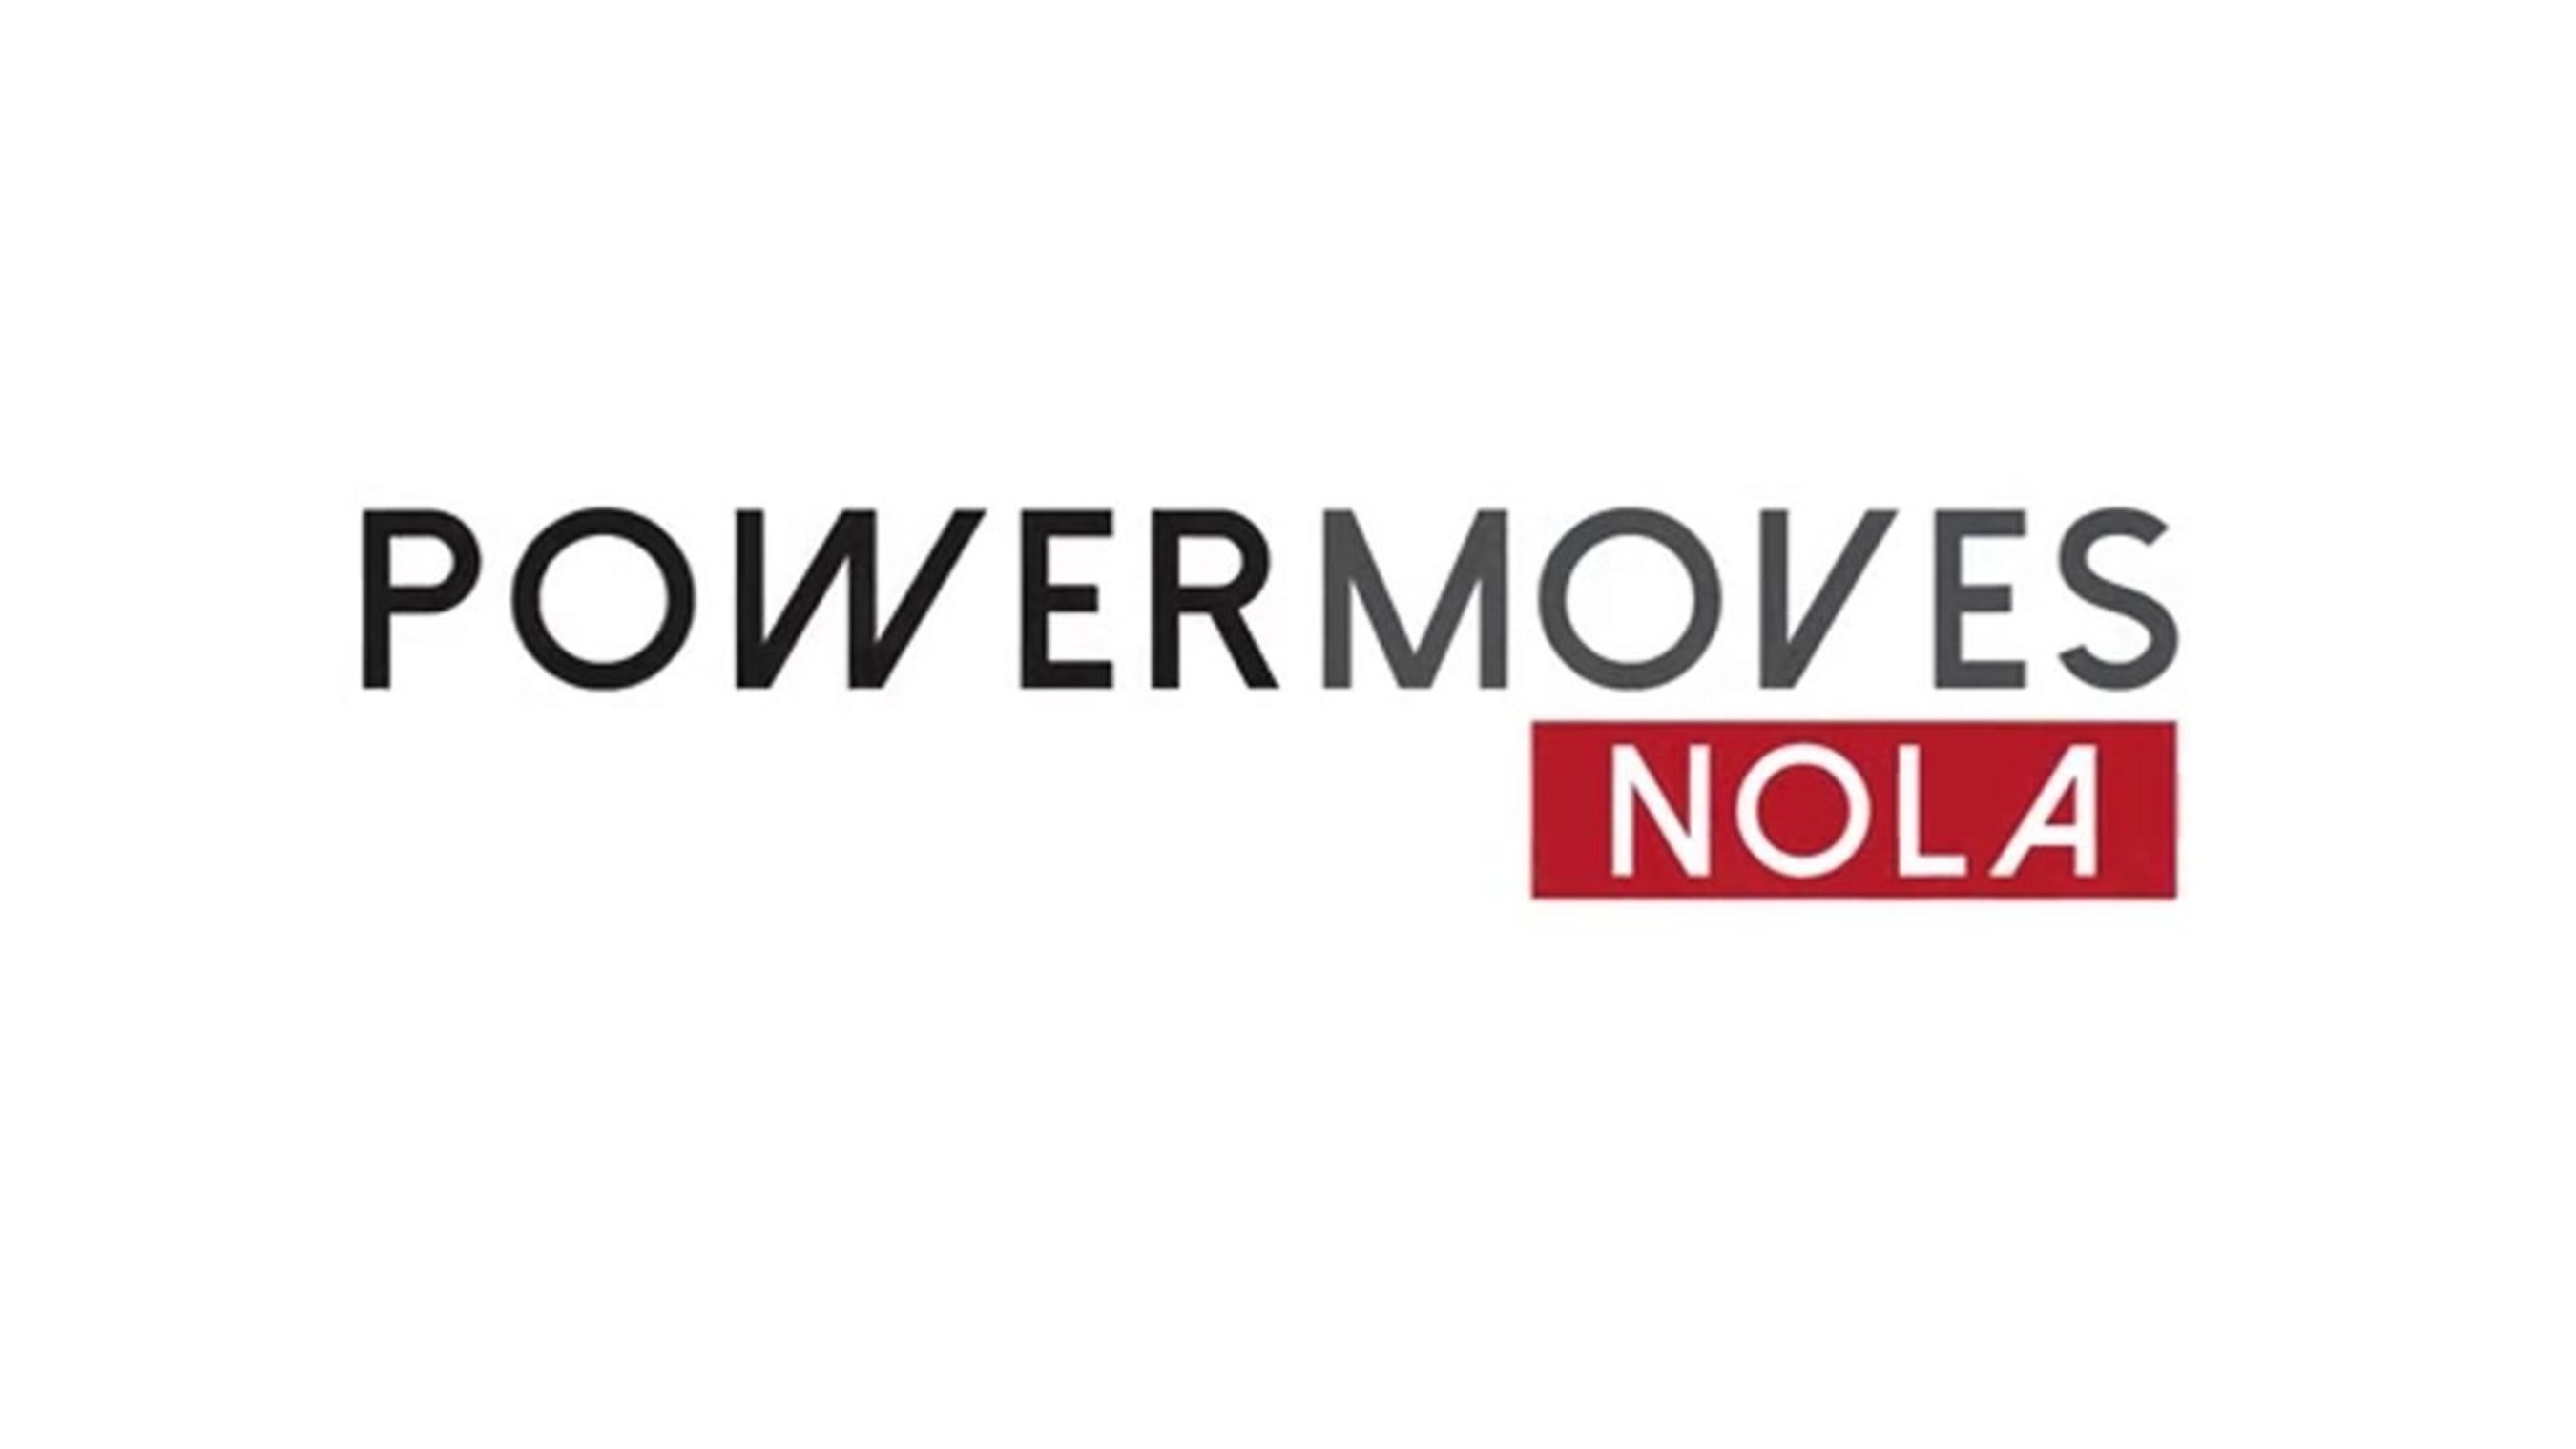 The national conference is a three-day event being held on July 3, 2015 in New Orleans. From boot camps to one-on-one investor meetings, PowerMoves.NOLA is designed to give entrepreneurs of color an exclusive opportunity to promote their companies, network with advisors, and connect with a local and national startup community.